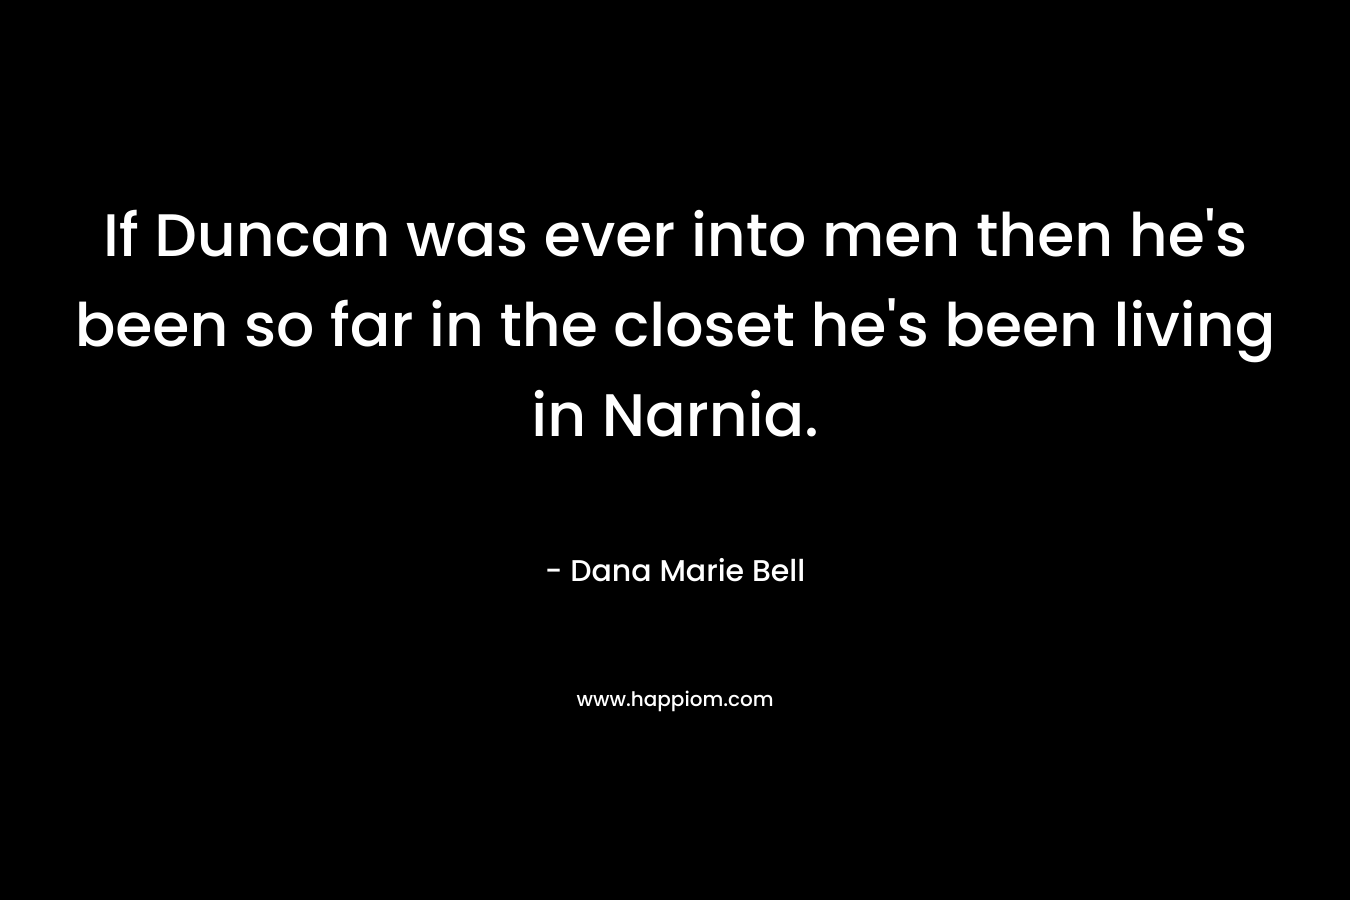 If Duncan was ever into men then he's been so far in the closet he's been living in Narnia.